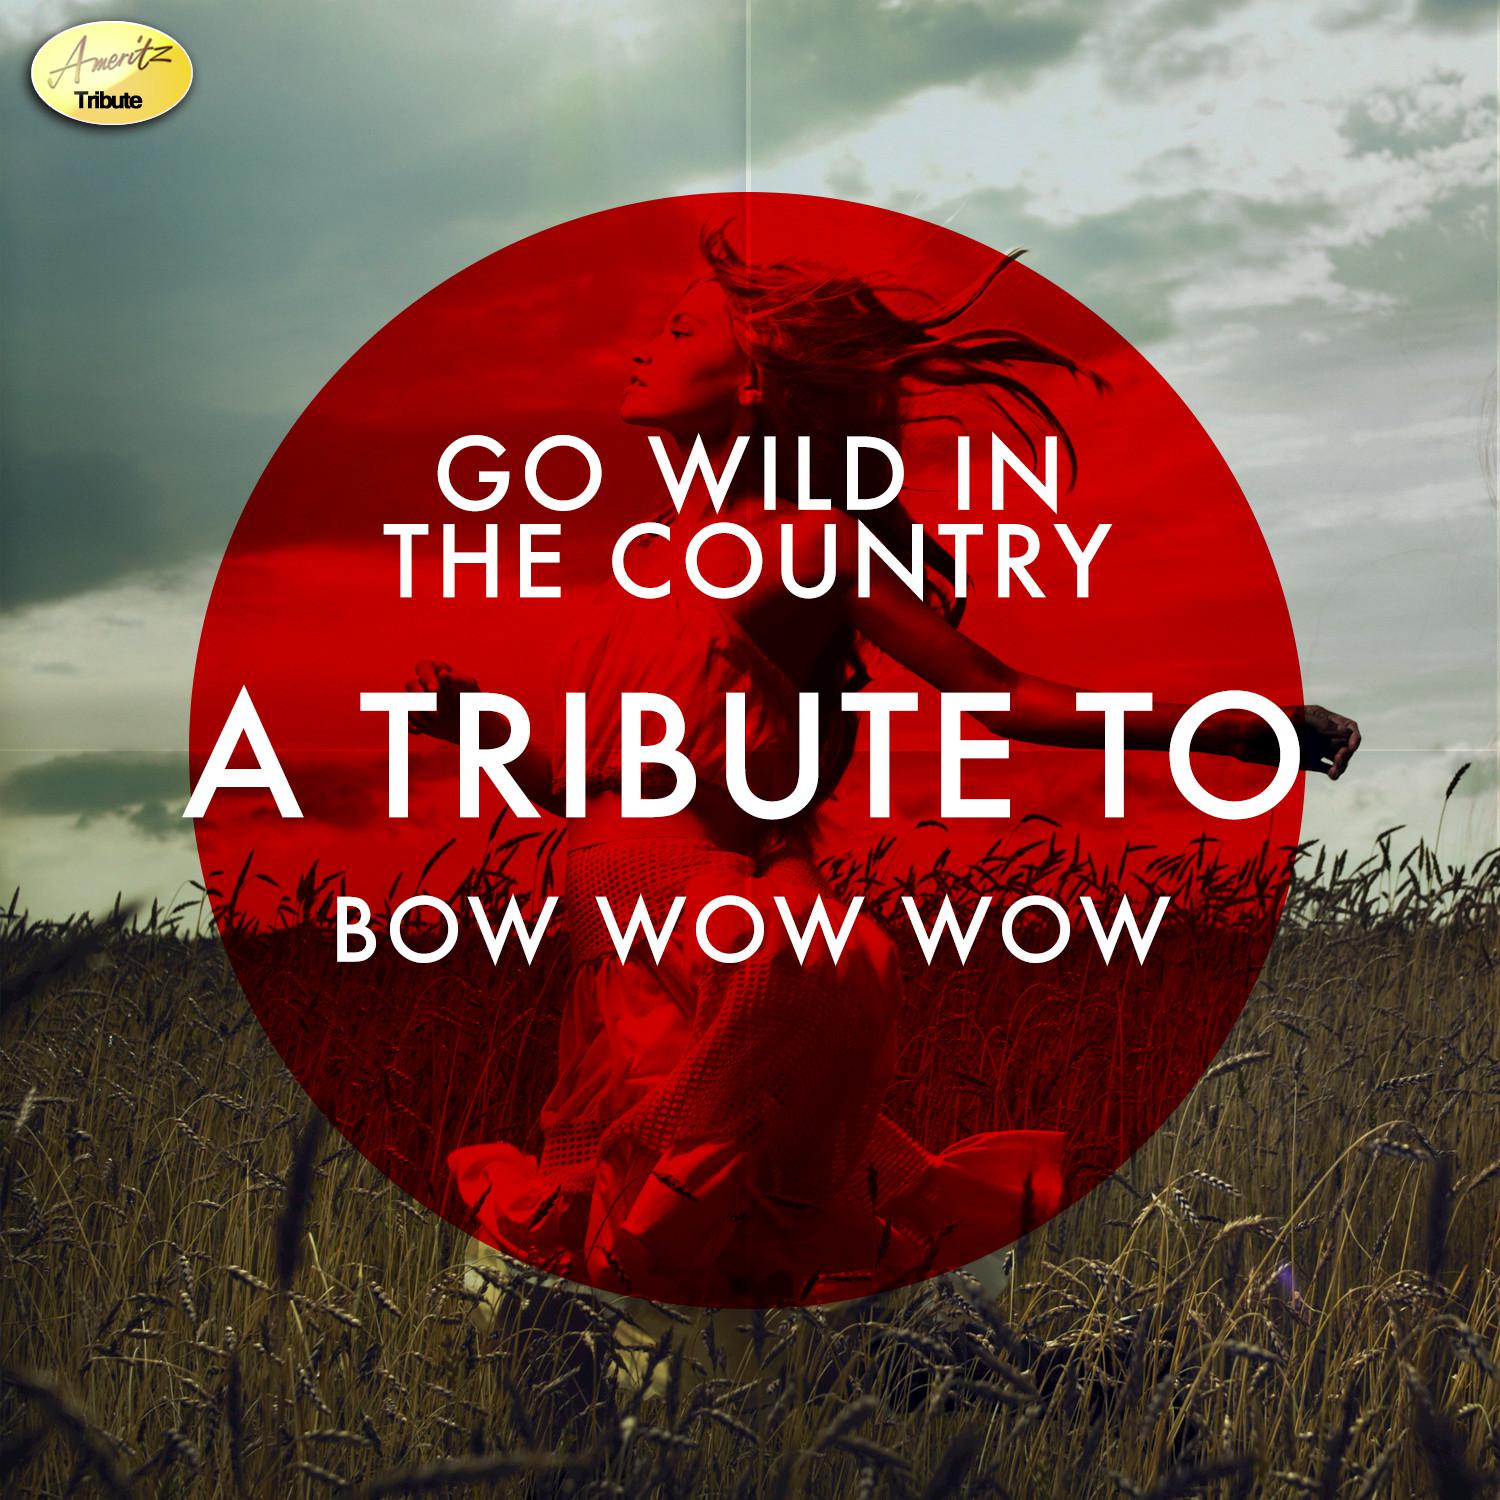 Go Wild in the Country: A Tribute to Bow Wow Wow